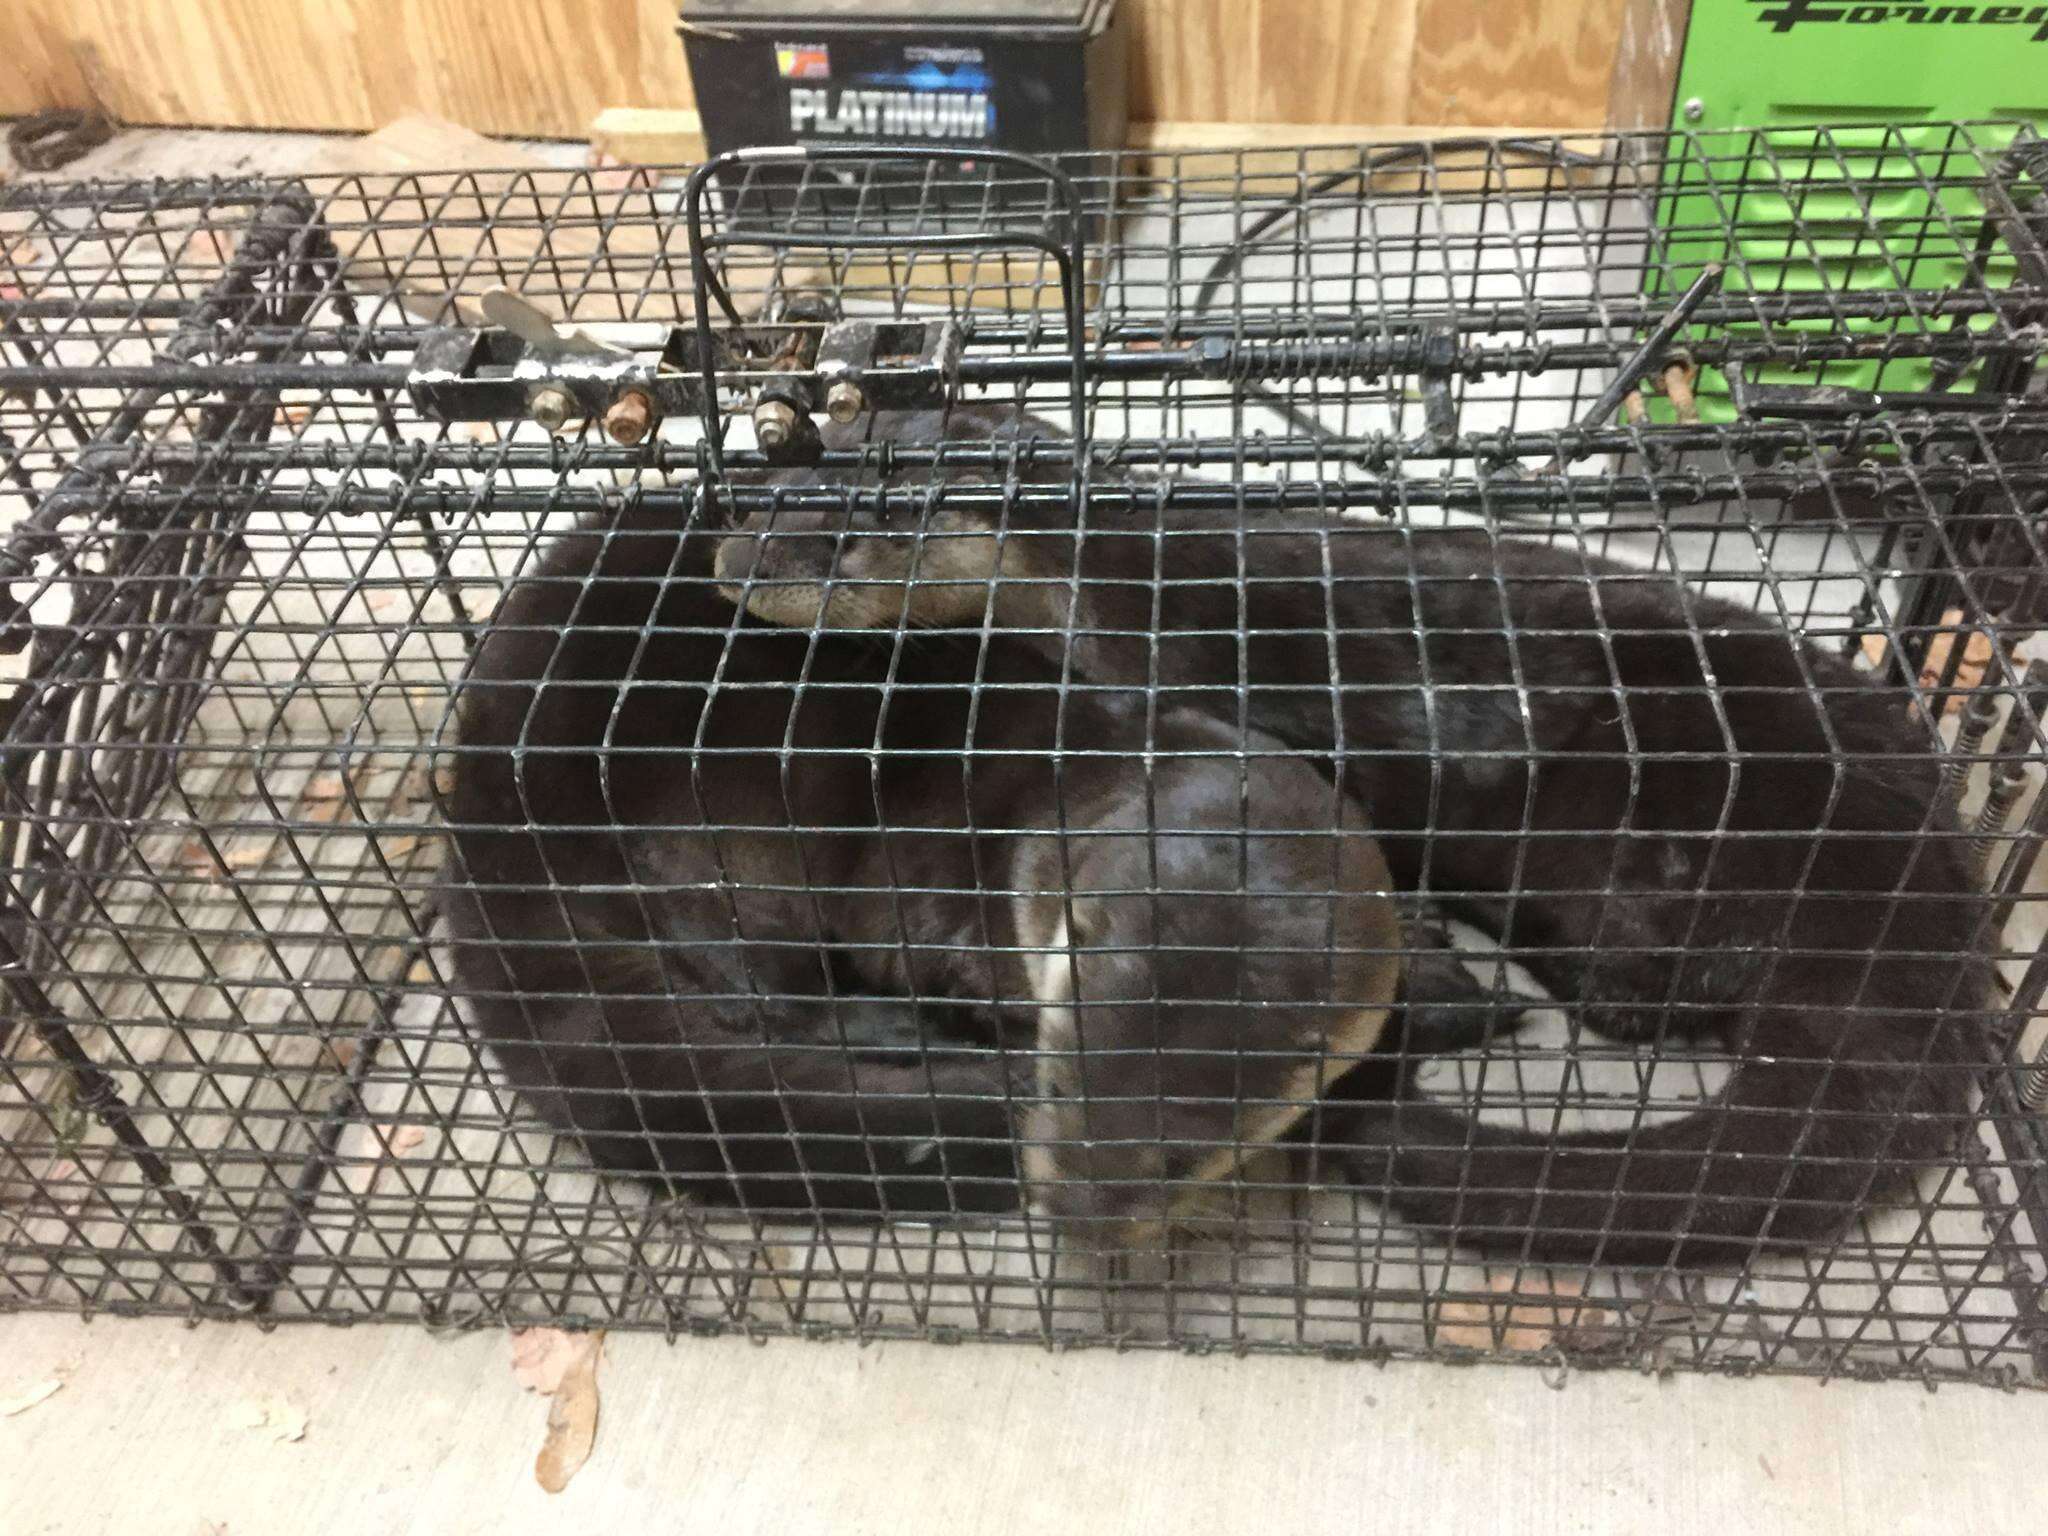 Two river otters caught in cage trap